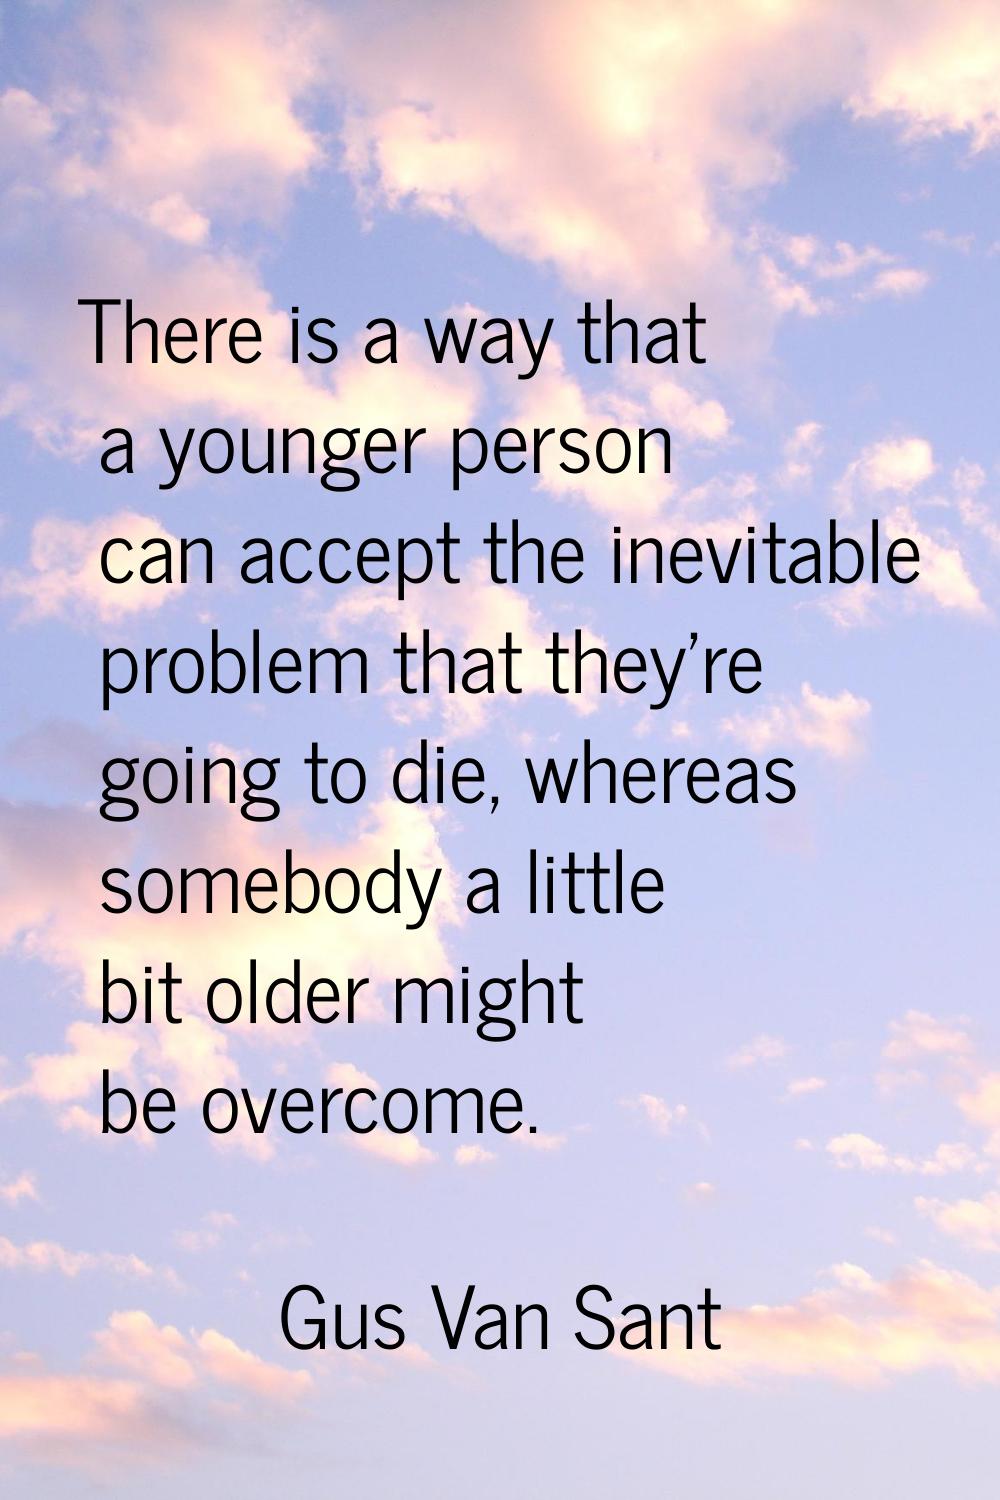 There is a way that a younger person can accept the inevitable problem that they're going to die, w